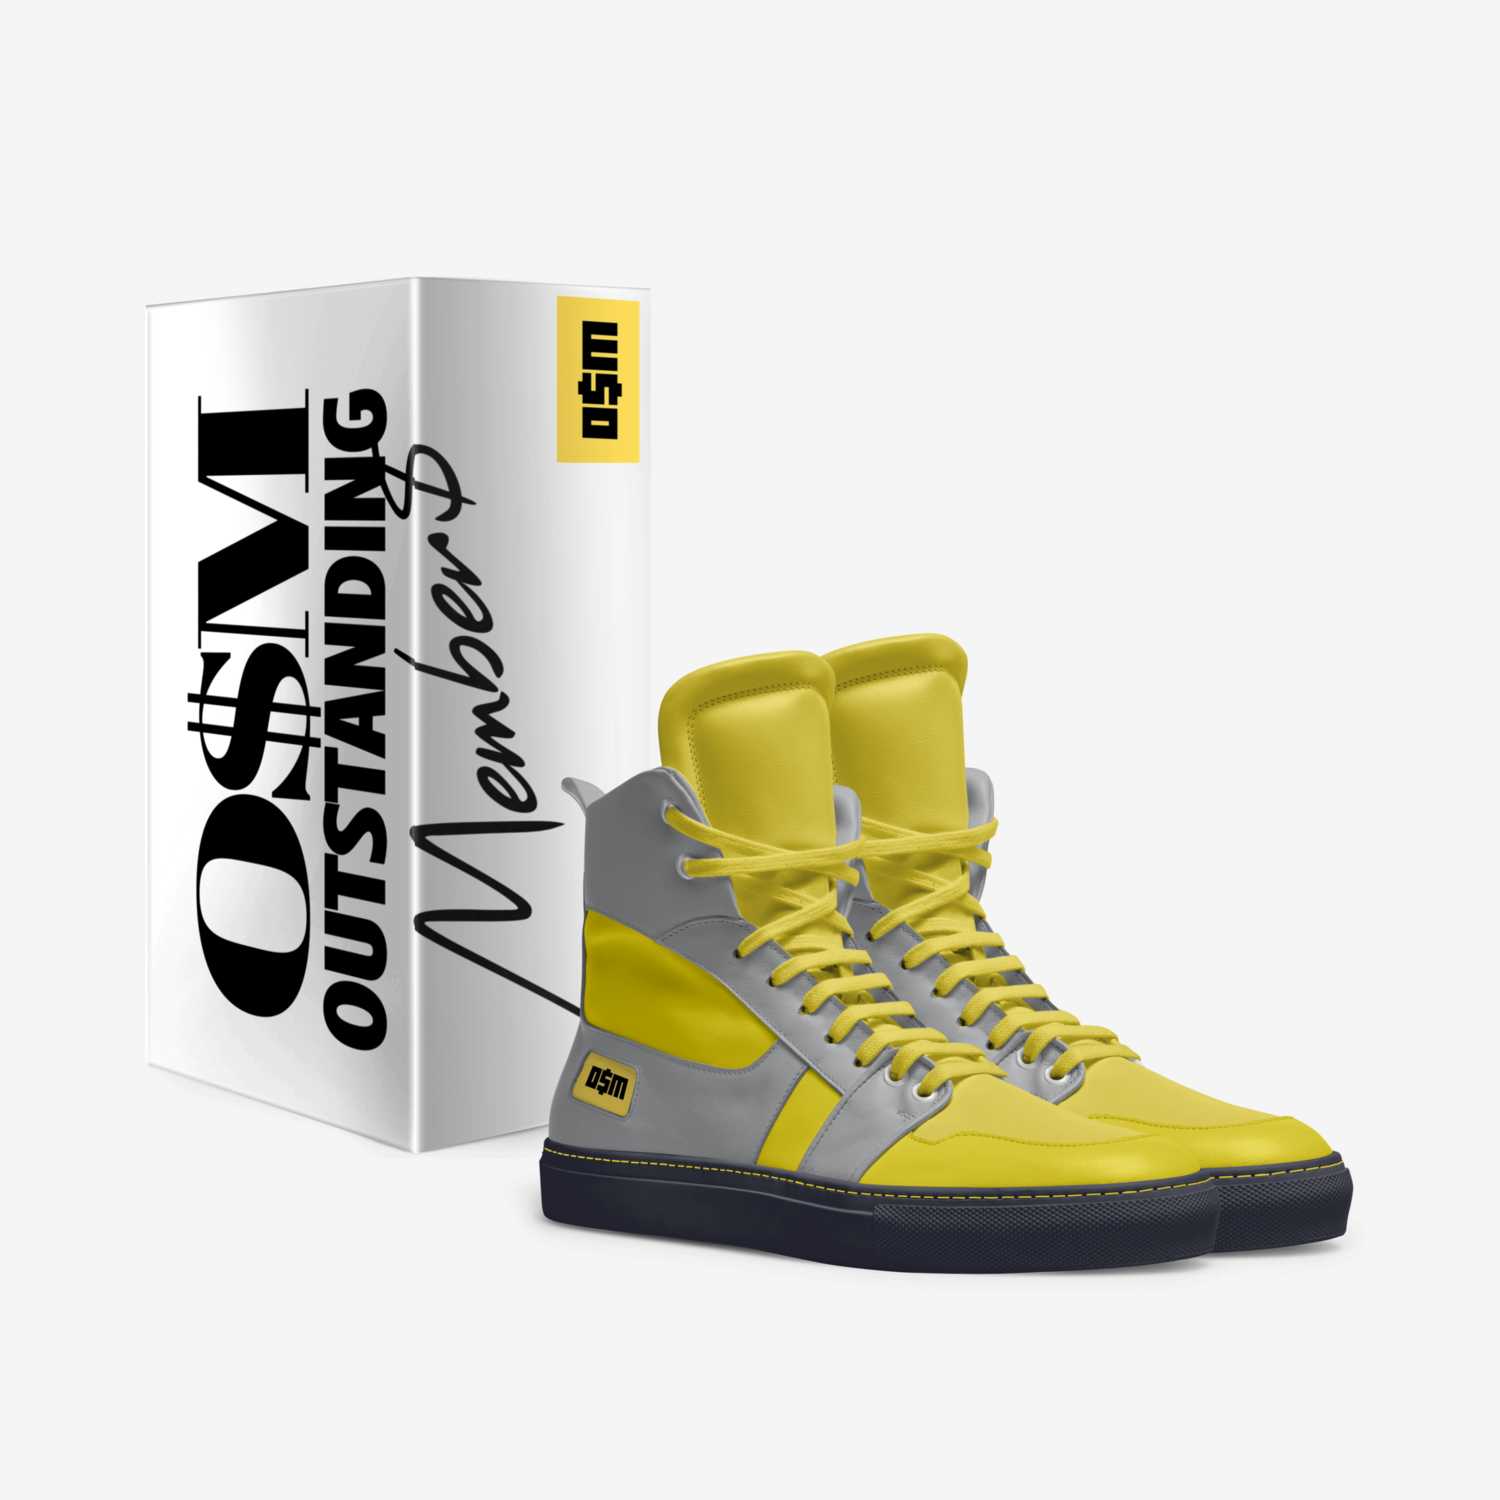 O$M custom made in Italy shoes by Ahad Bey | Box view